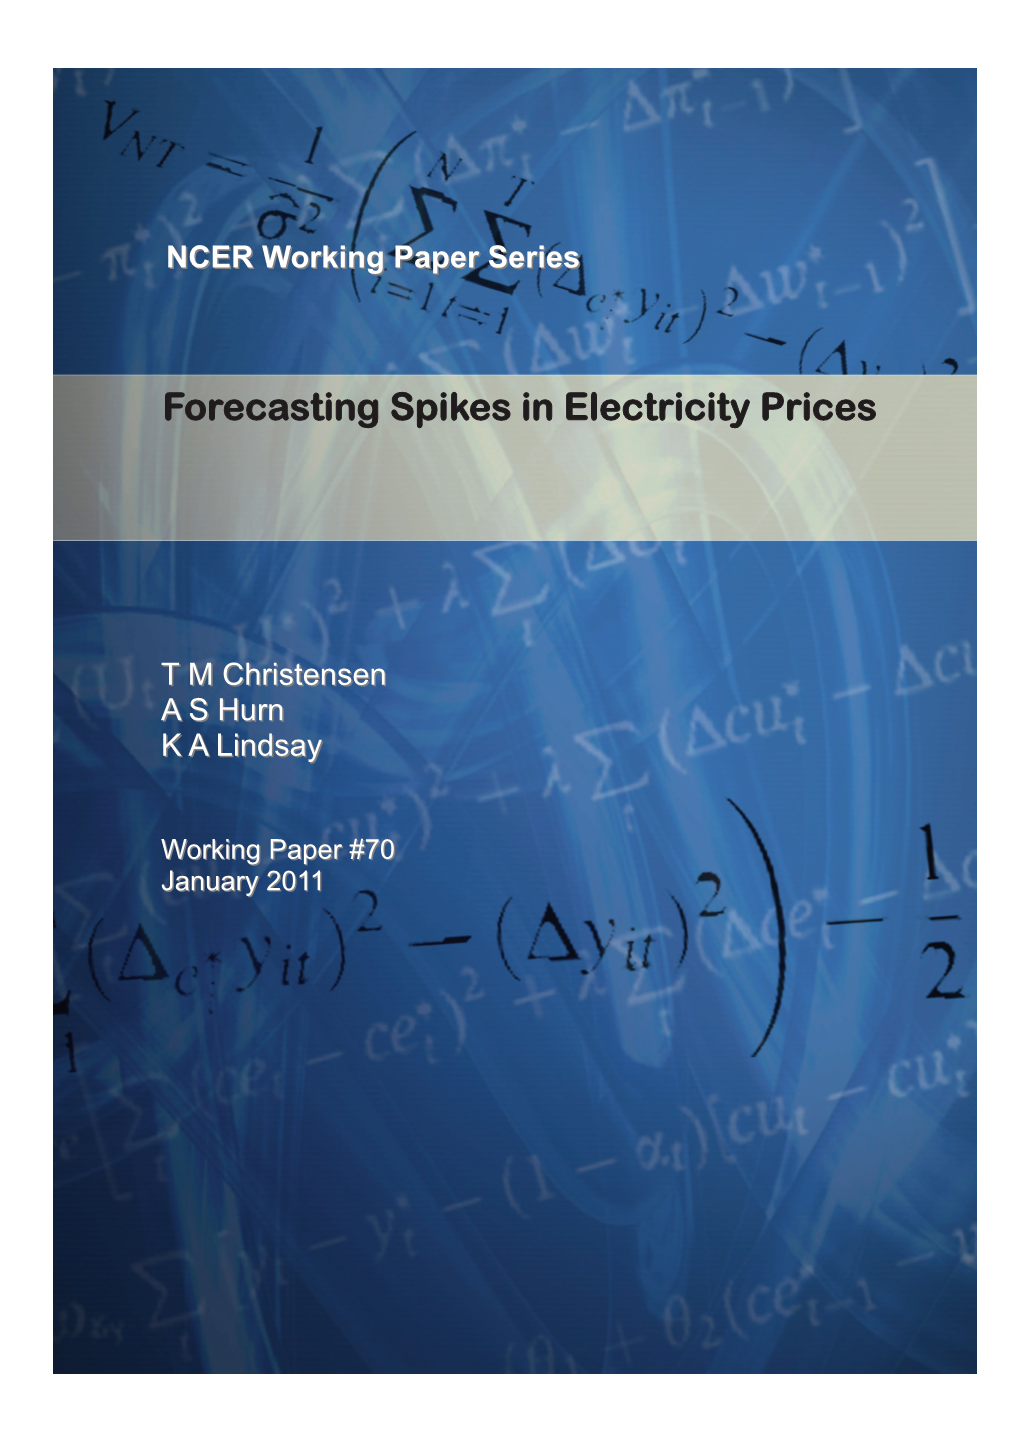 Forecasting Spikes in Electricity Prices